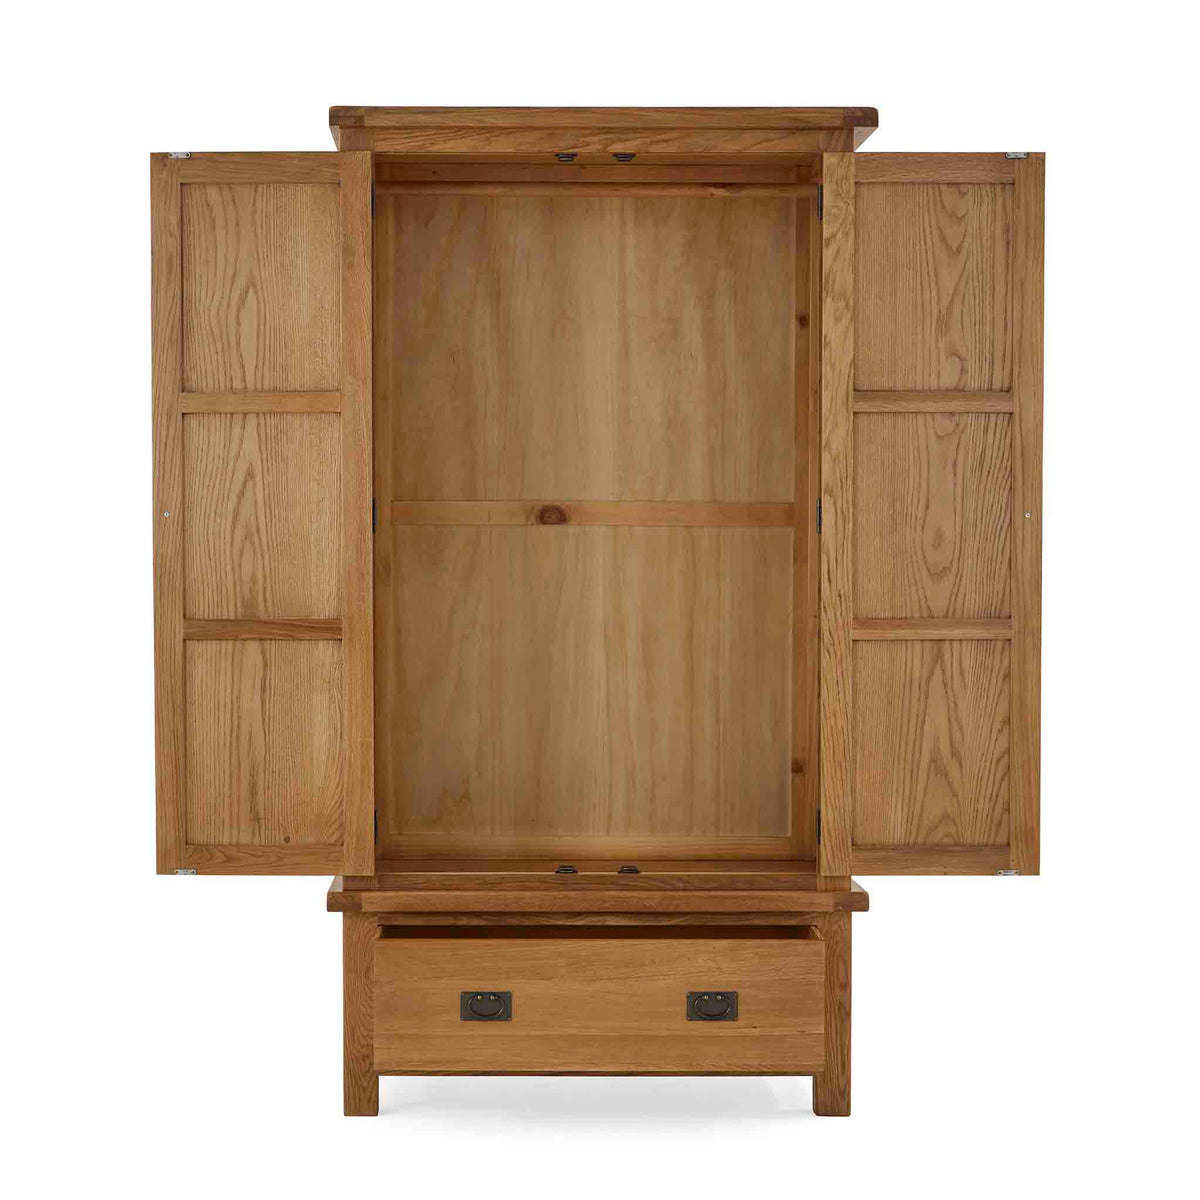 Zelah Oak Double Wardrobe with Drawer - Front view with wardrobes and drawers open